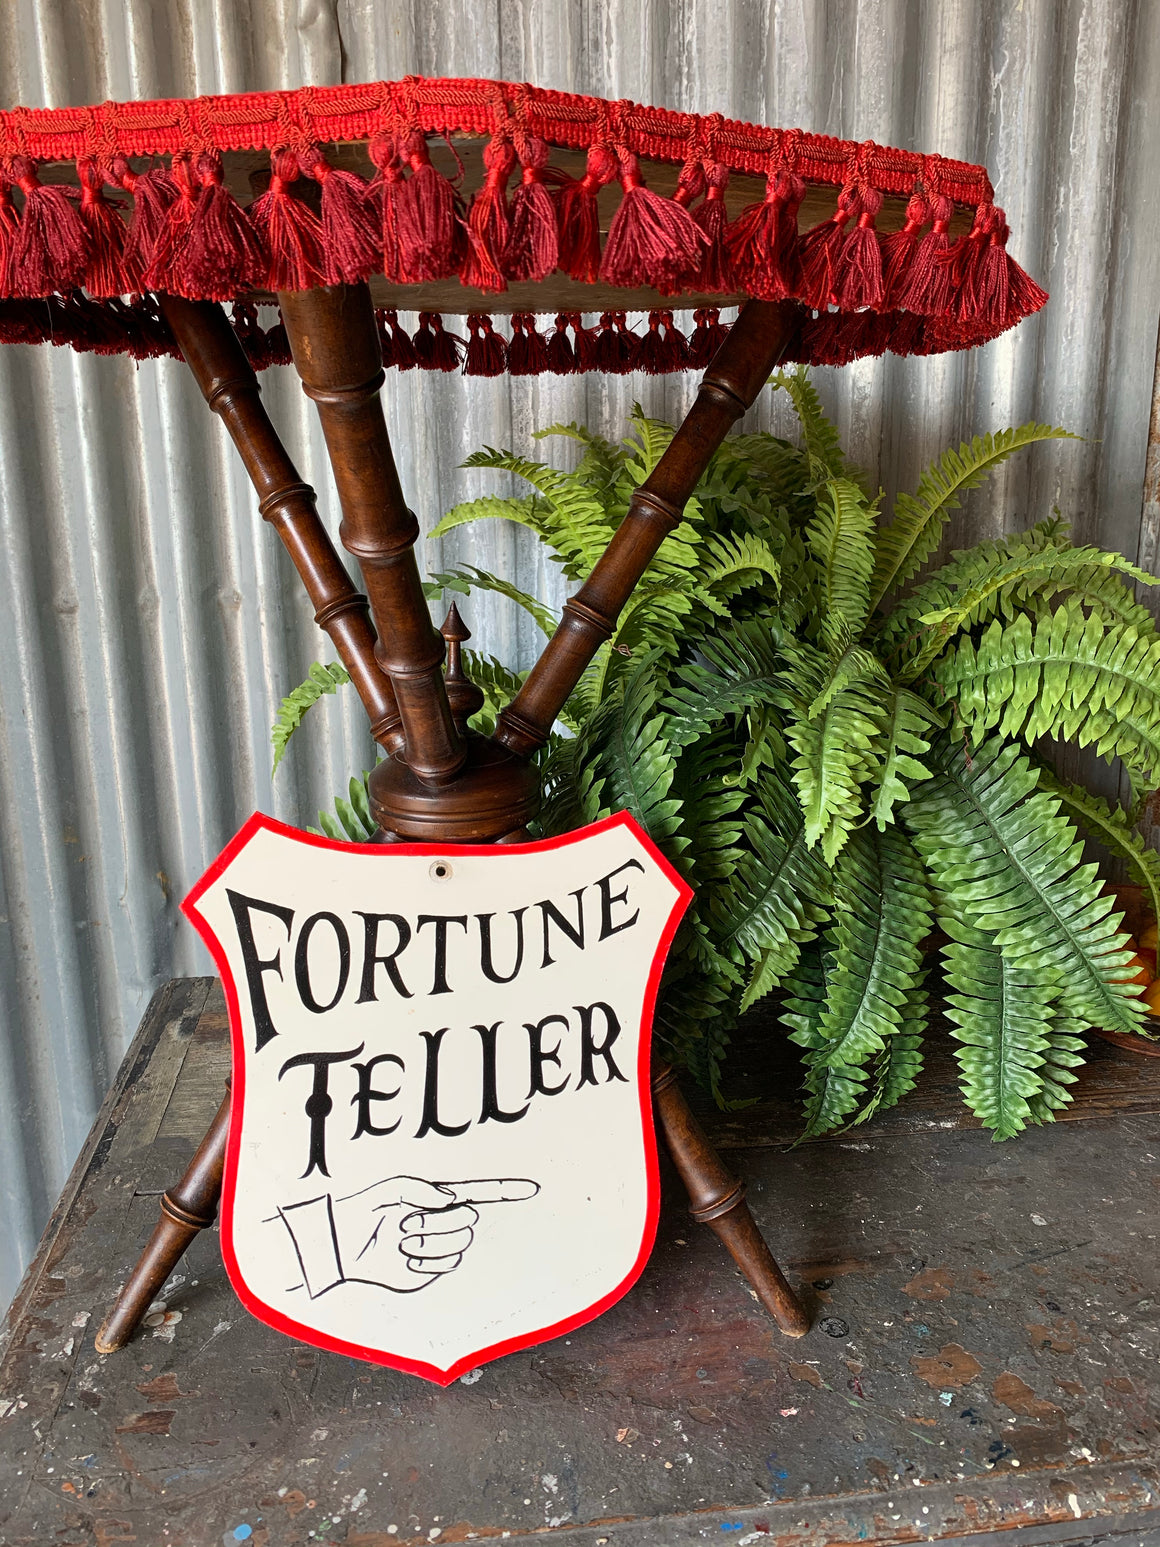 A hand painted fairground advertising sign - Fortune Teller